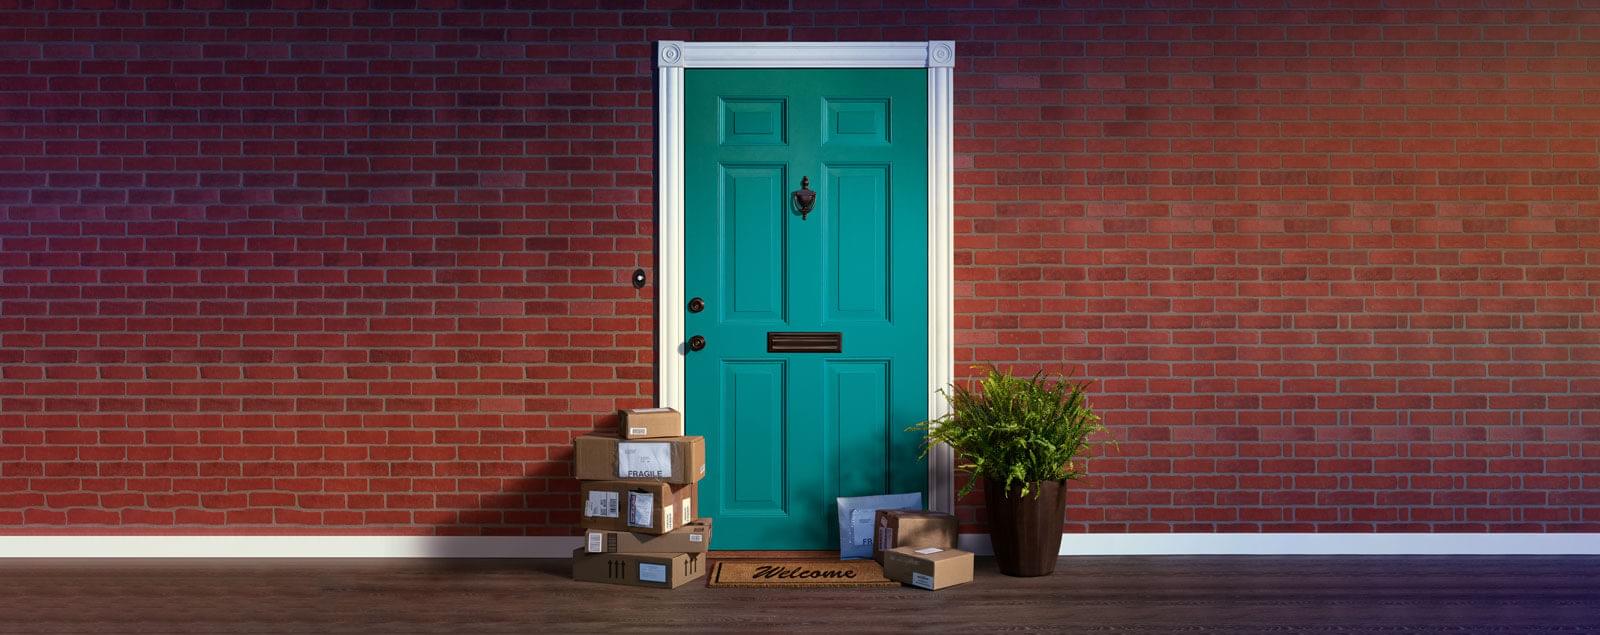 Home front door with packages outside